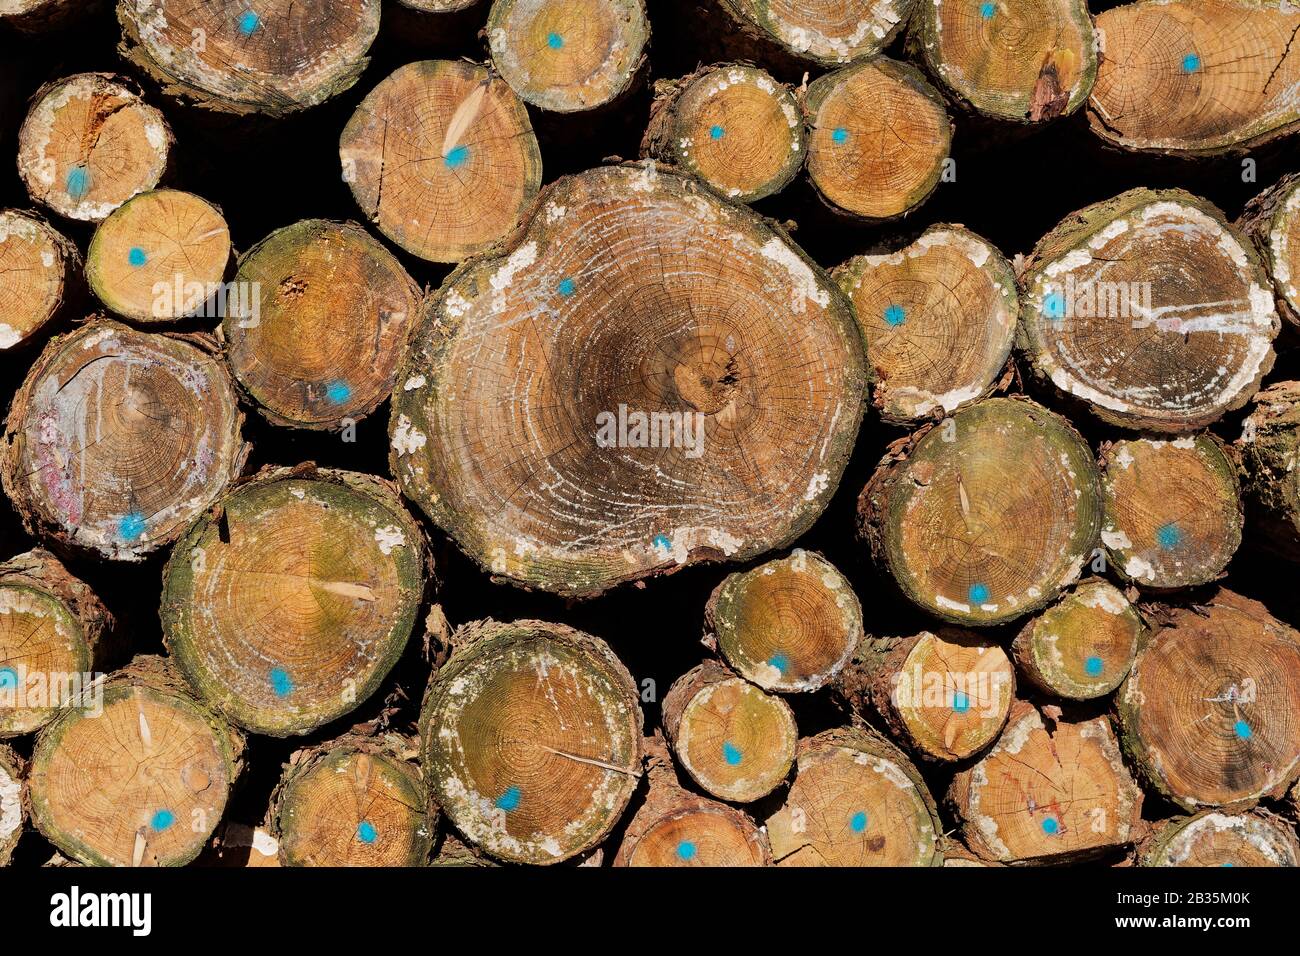 Wooden Background: Pile of Softwood Tree Trunks Closeup View Stock Photo